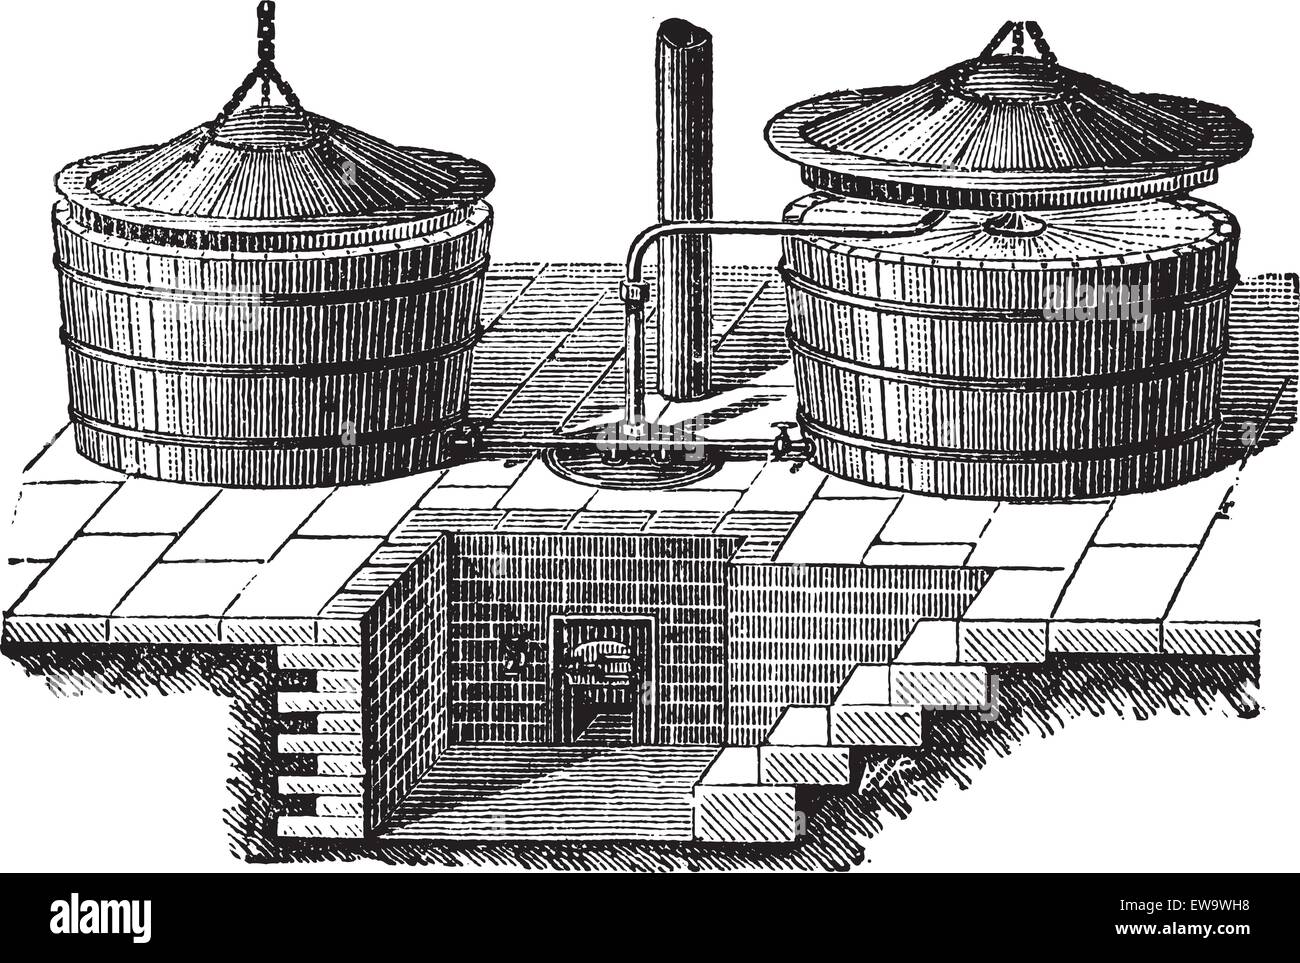 Old engraved illustration of old washing machine with steam pressure. Industrial encyclopedia E.-O. Lami - 1875. Stock Vector